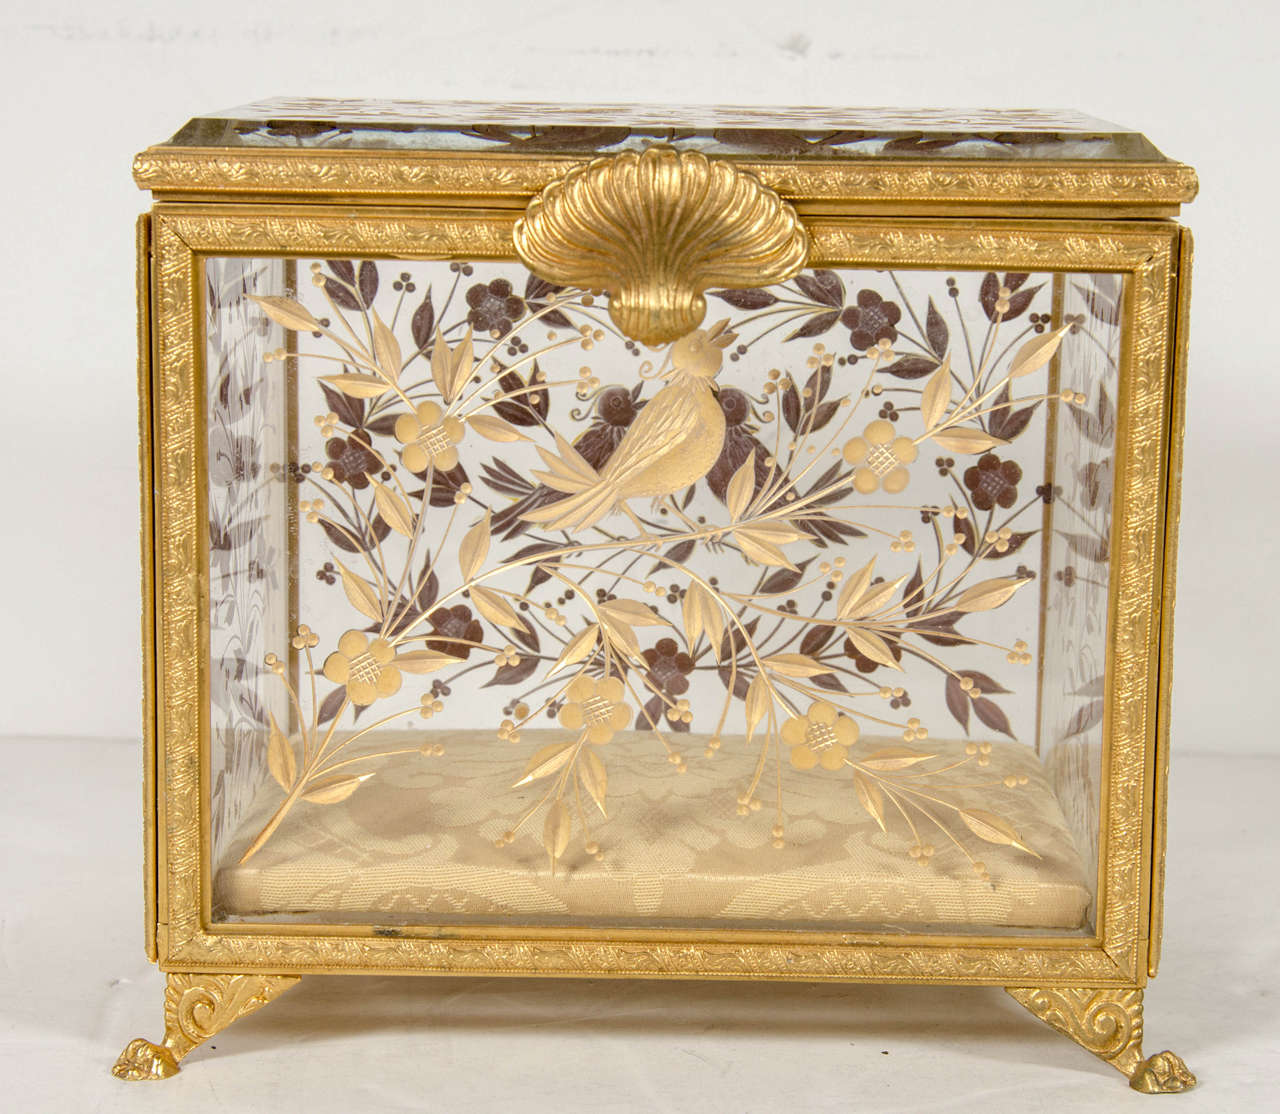 This gorgeous box features an ormolu frame with a stylized shell pull with lions feet and relief detailing throughout . The inset beveled crystal panels feature a stylized flora and fauna design with a bird motif .